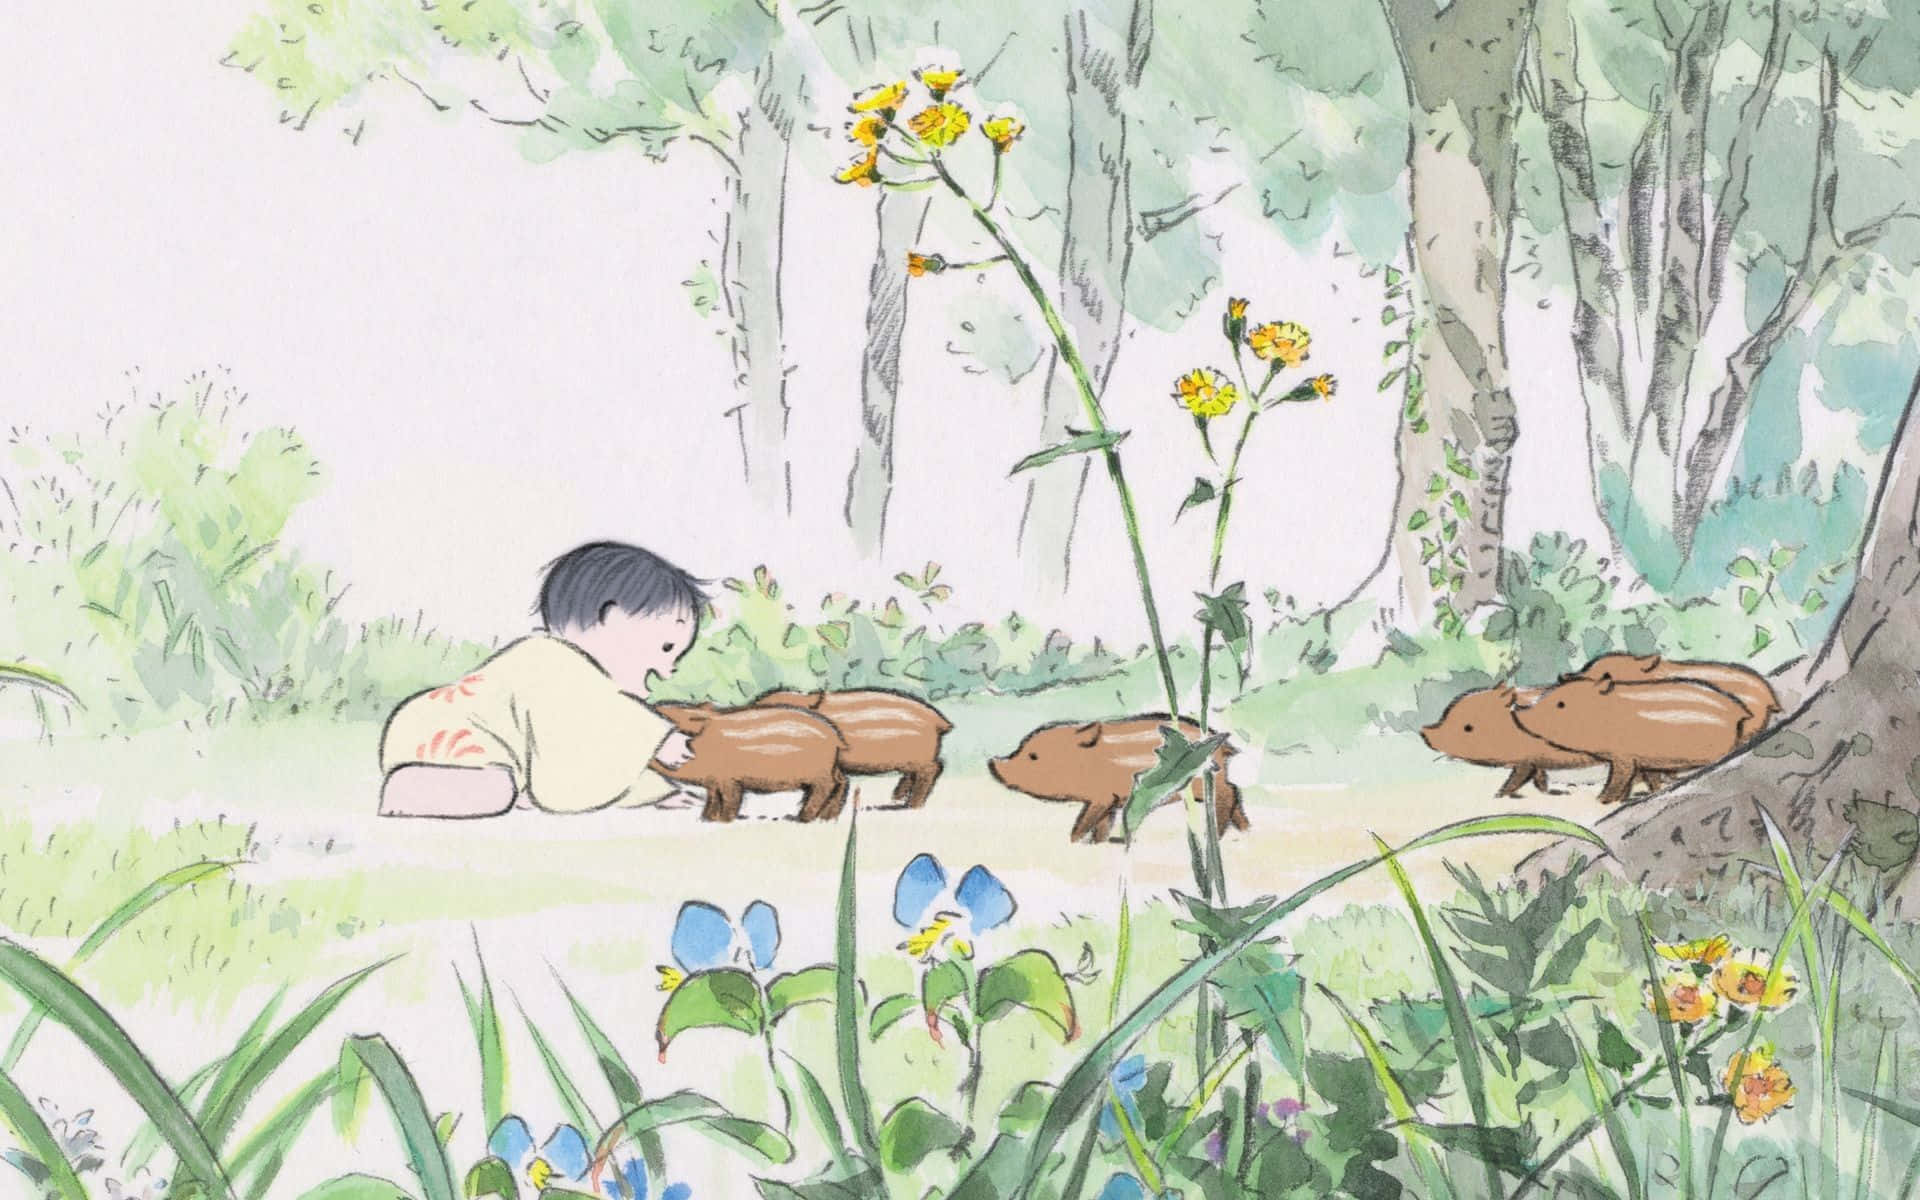 An Enigmatic Scene From The Tale Of The Princess Kaguya Wallpaper